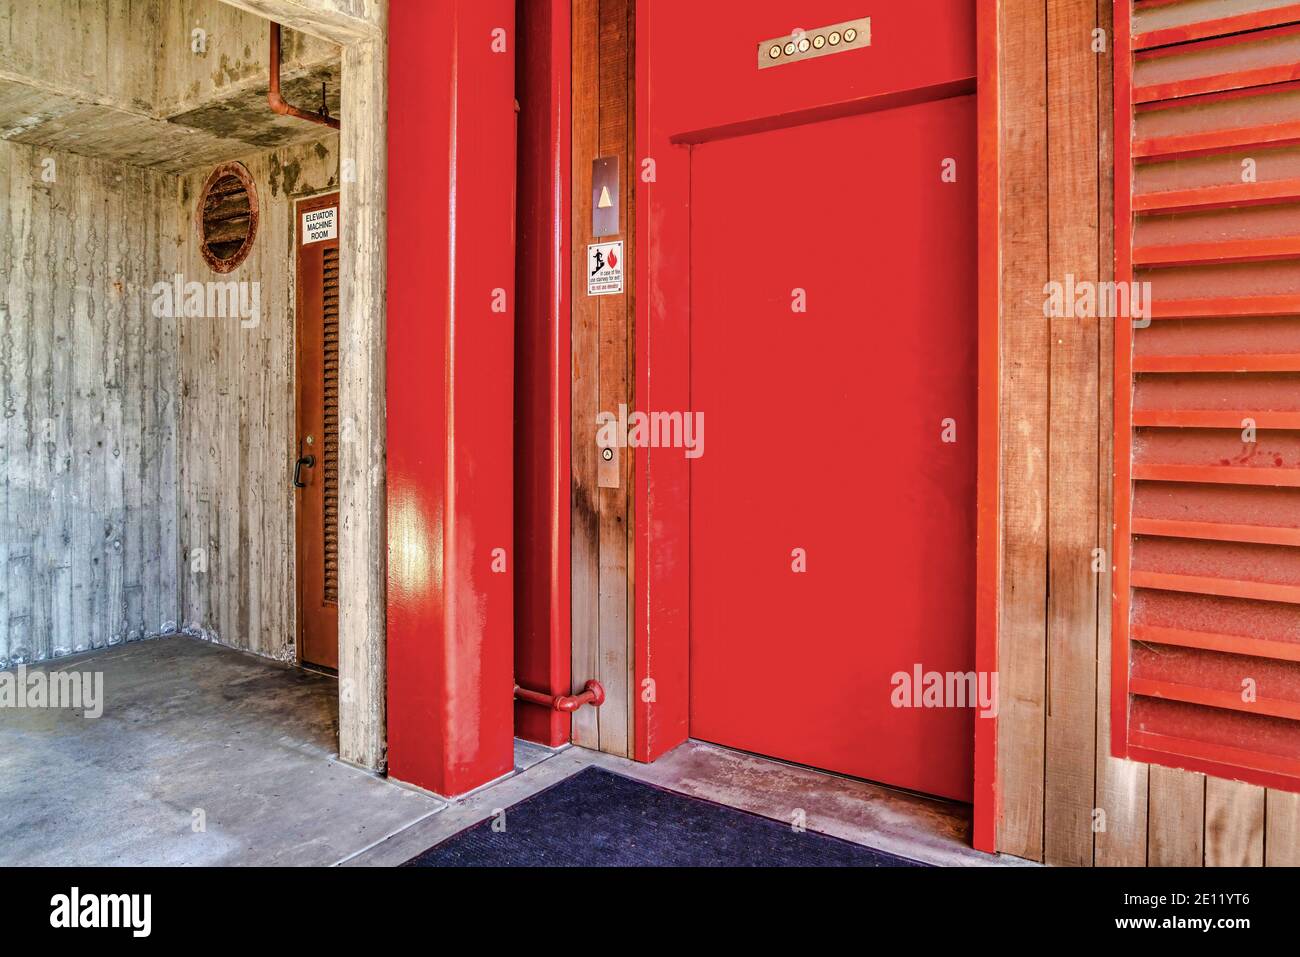 Vibrant red elevator door with buttons San Diego building exterior Stock Photo Alamy